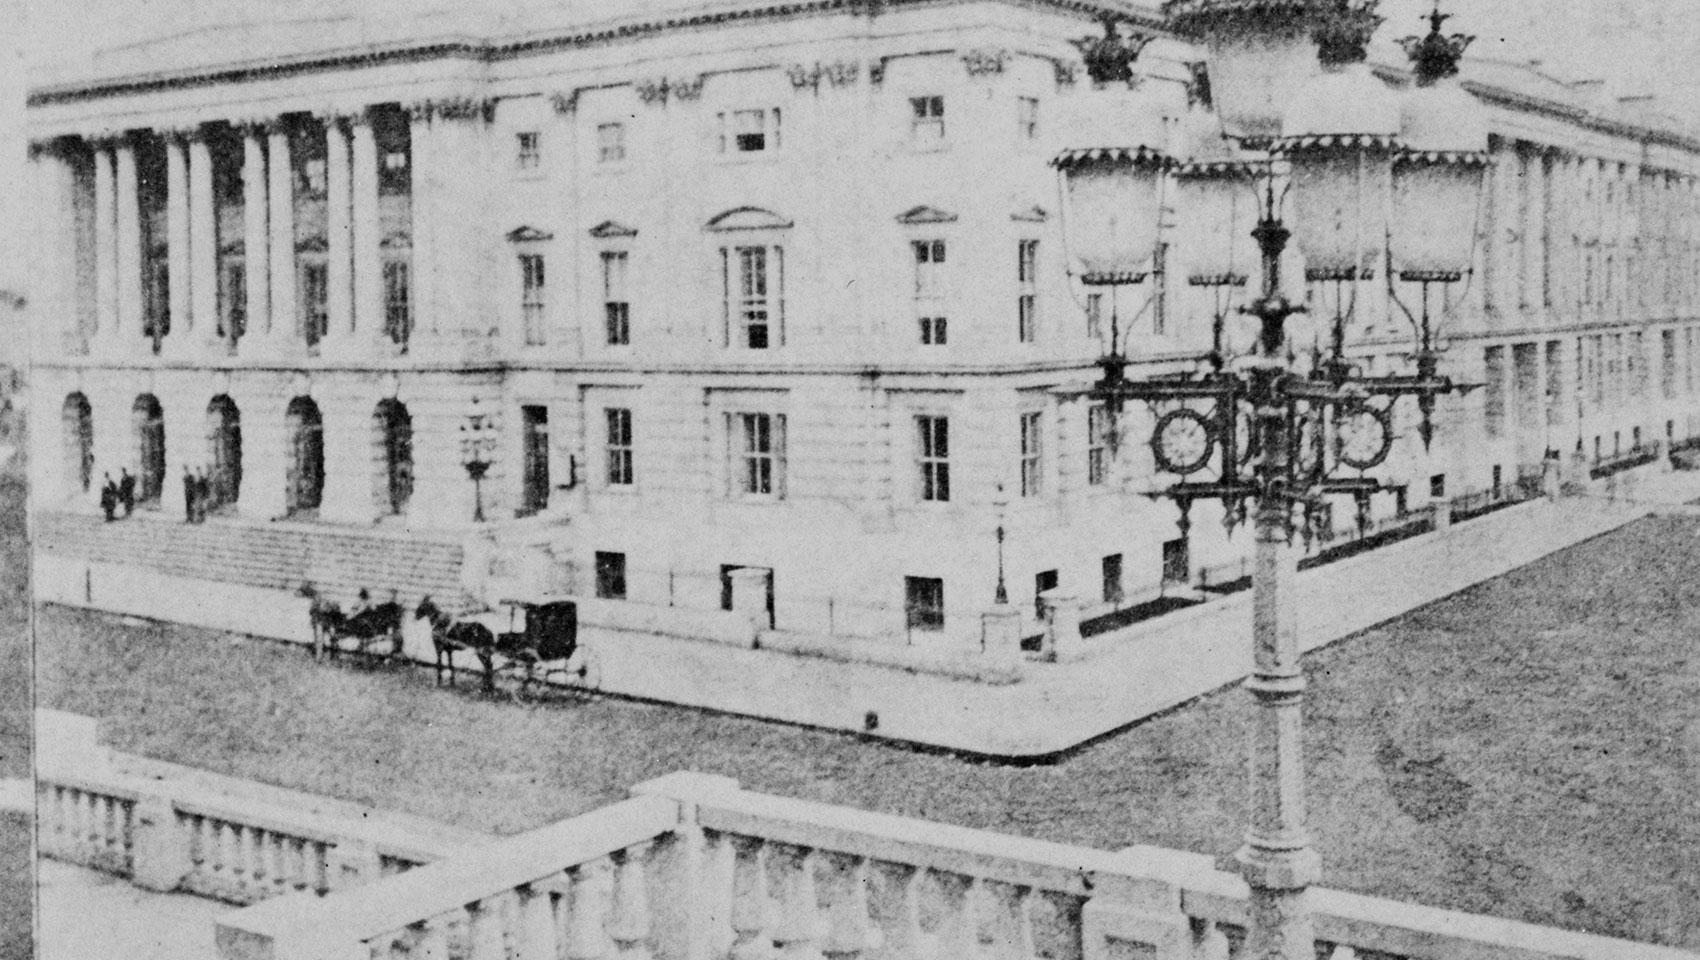 1873 photograph of Washington DC's General Post Office